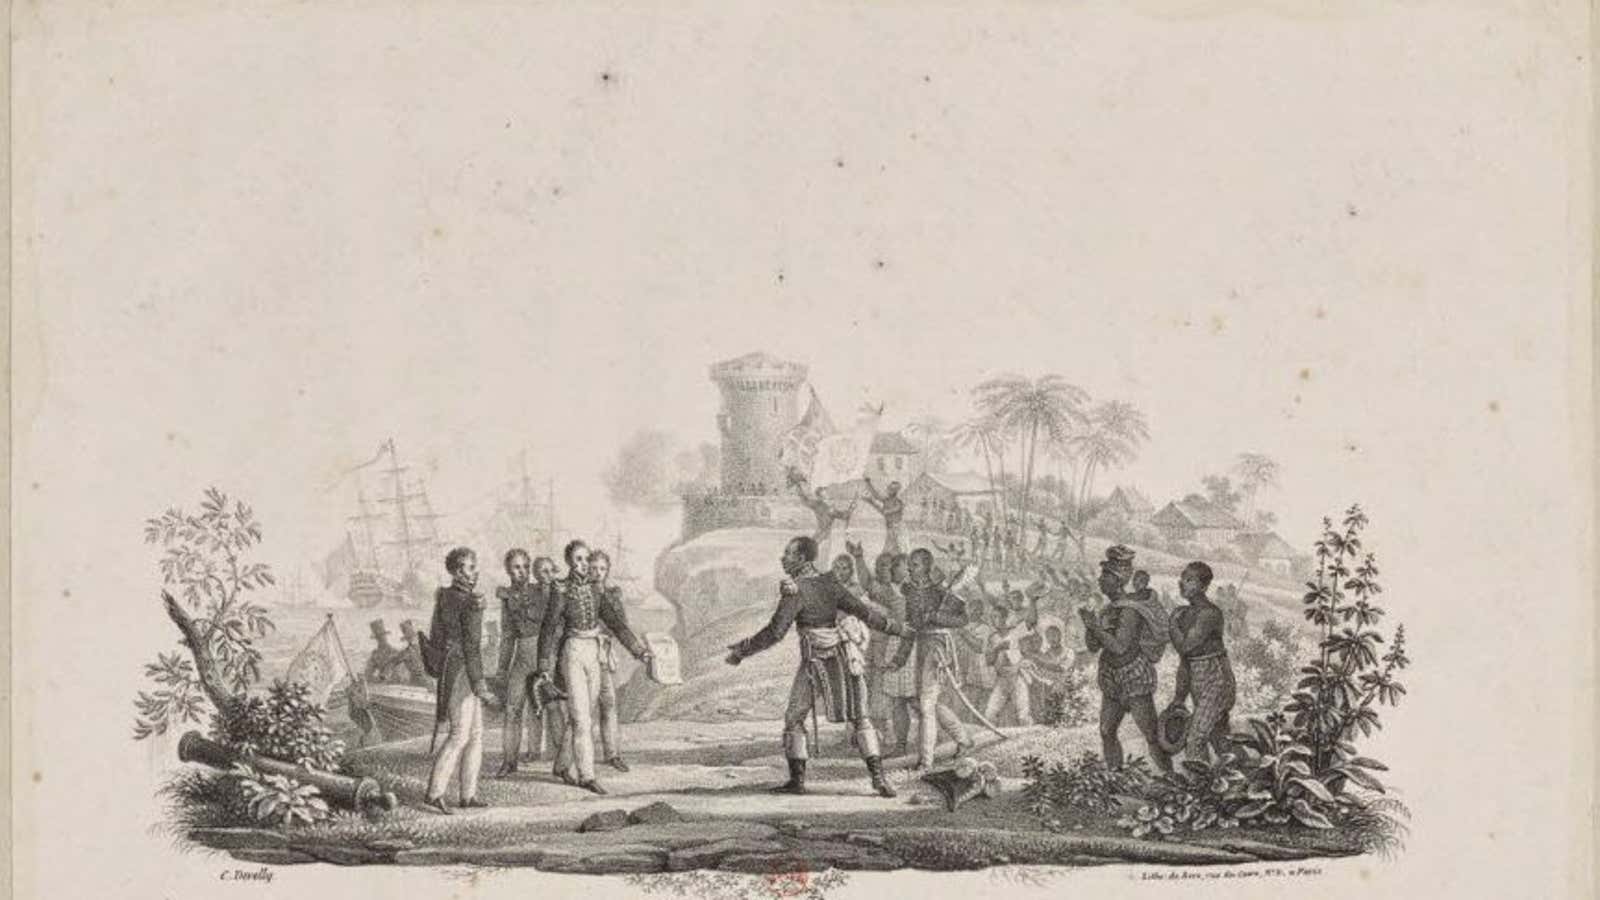 Haitian President Jean-Pierre Boyer receiving Charles X’s decree recognizing Haitian independence on July 11, 1825.